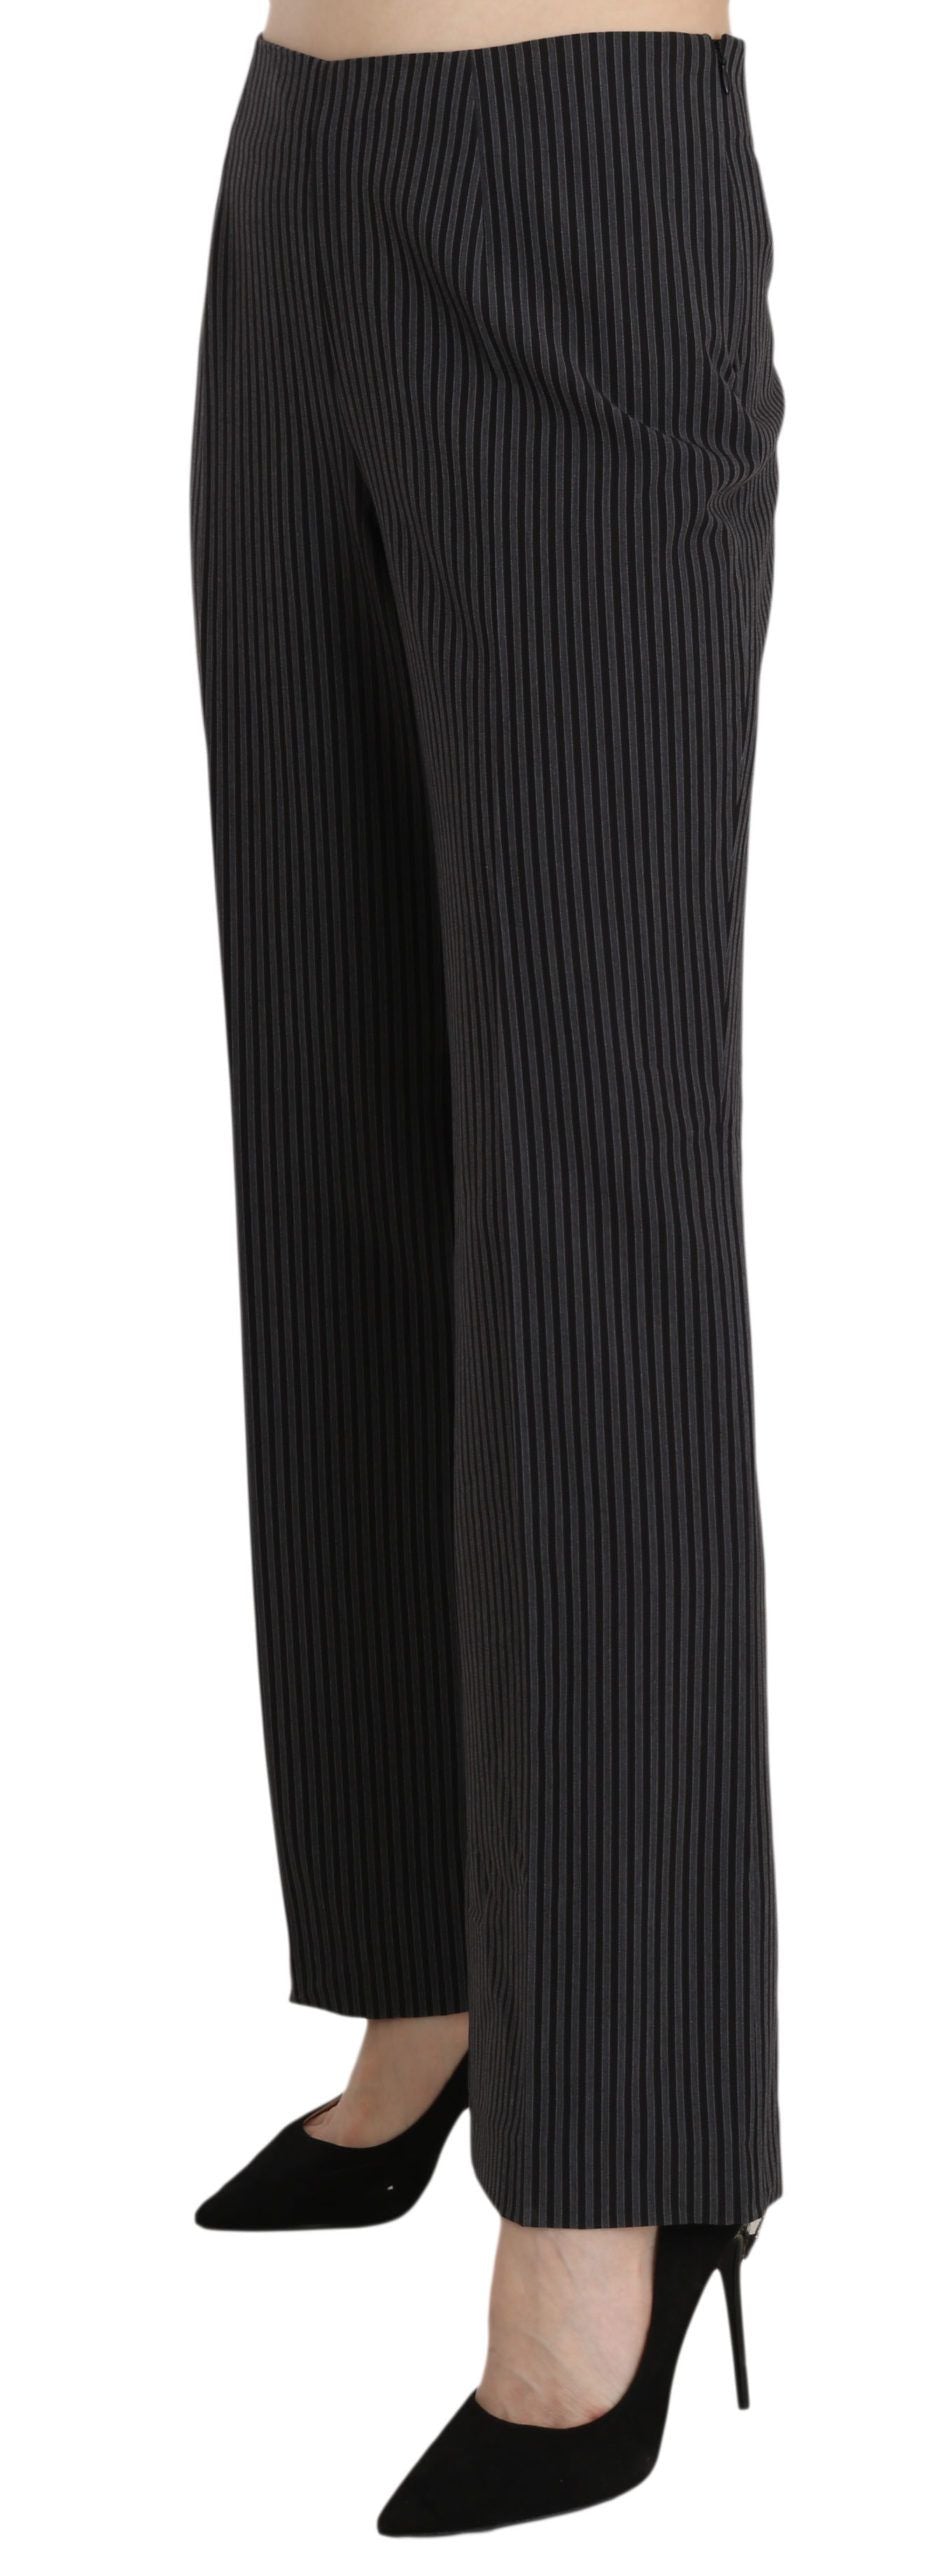 Black Striped Cotton Sretch Dress Trousers Pants - Designed by BENCIVENGA Available to Buy at a Discounted Price on Moon Behind The Hill Online Designer Discount Store